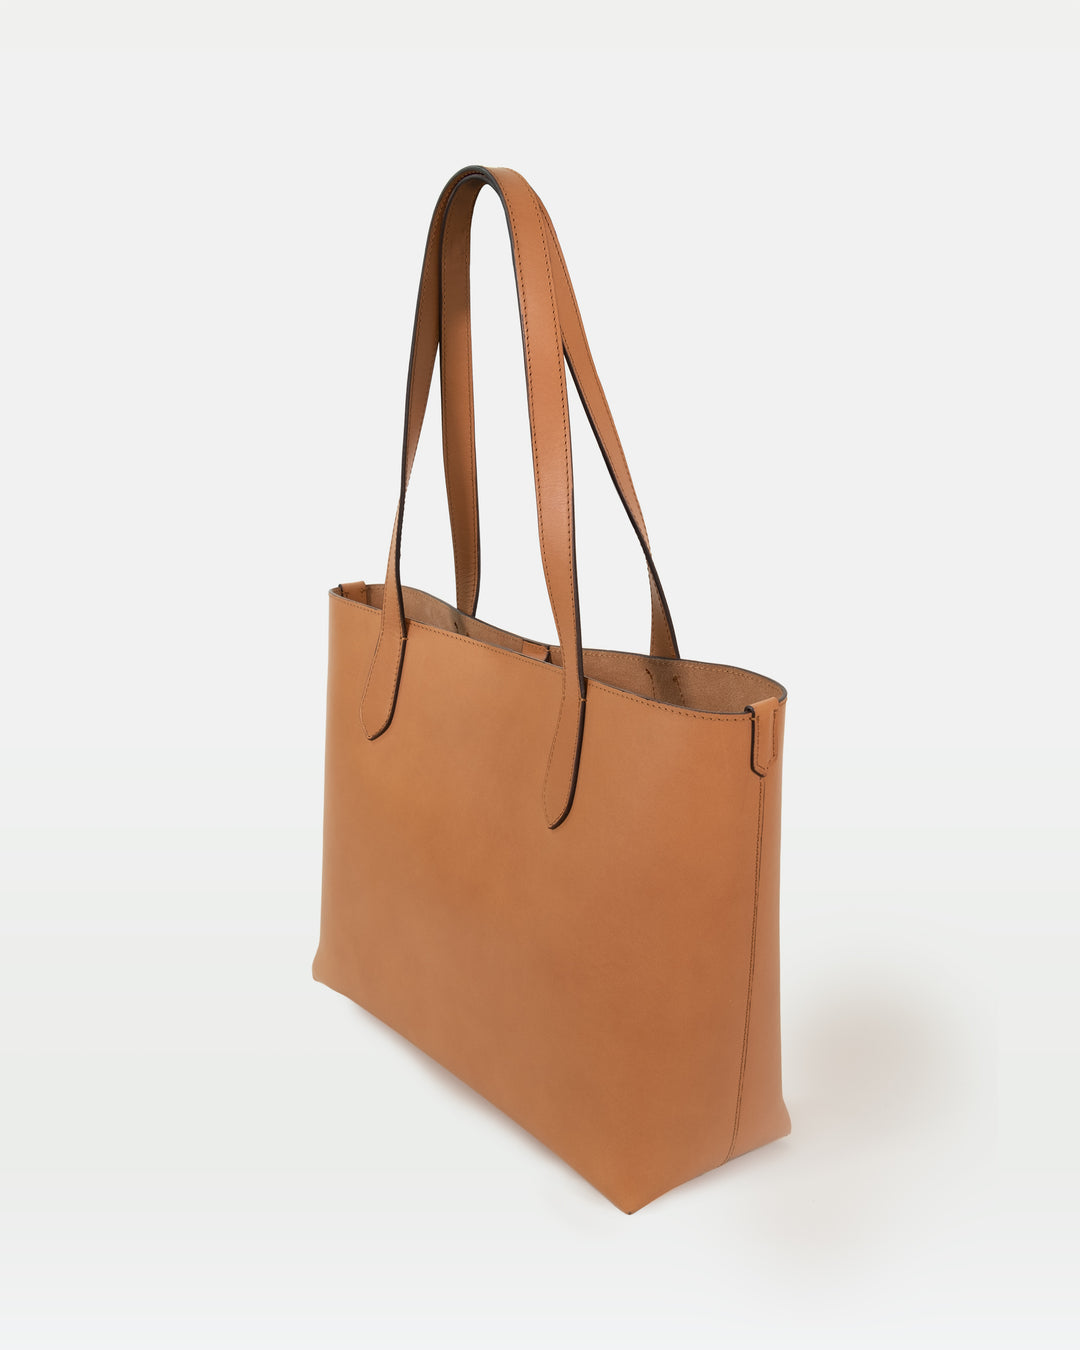 MODHER tote bag in naturale vegetable tanned Italian leather#color_naturale